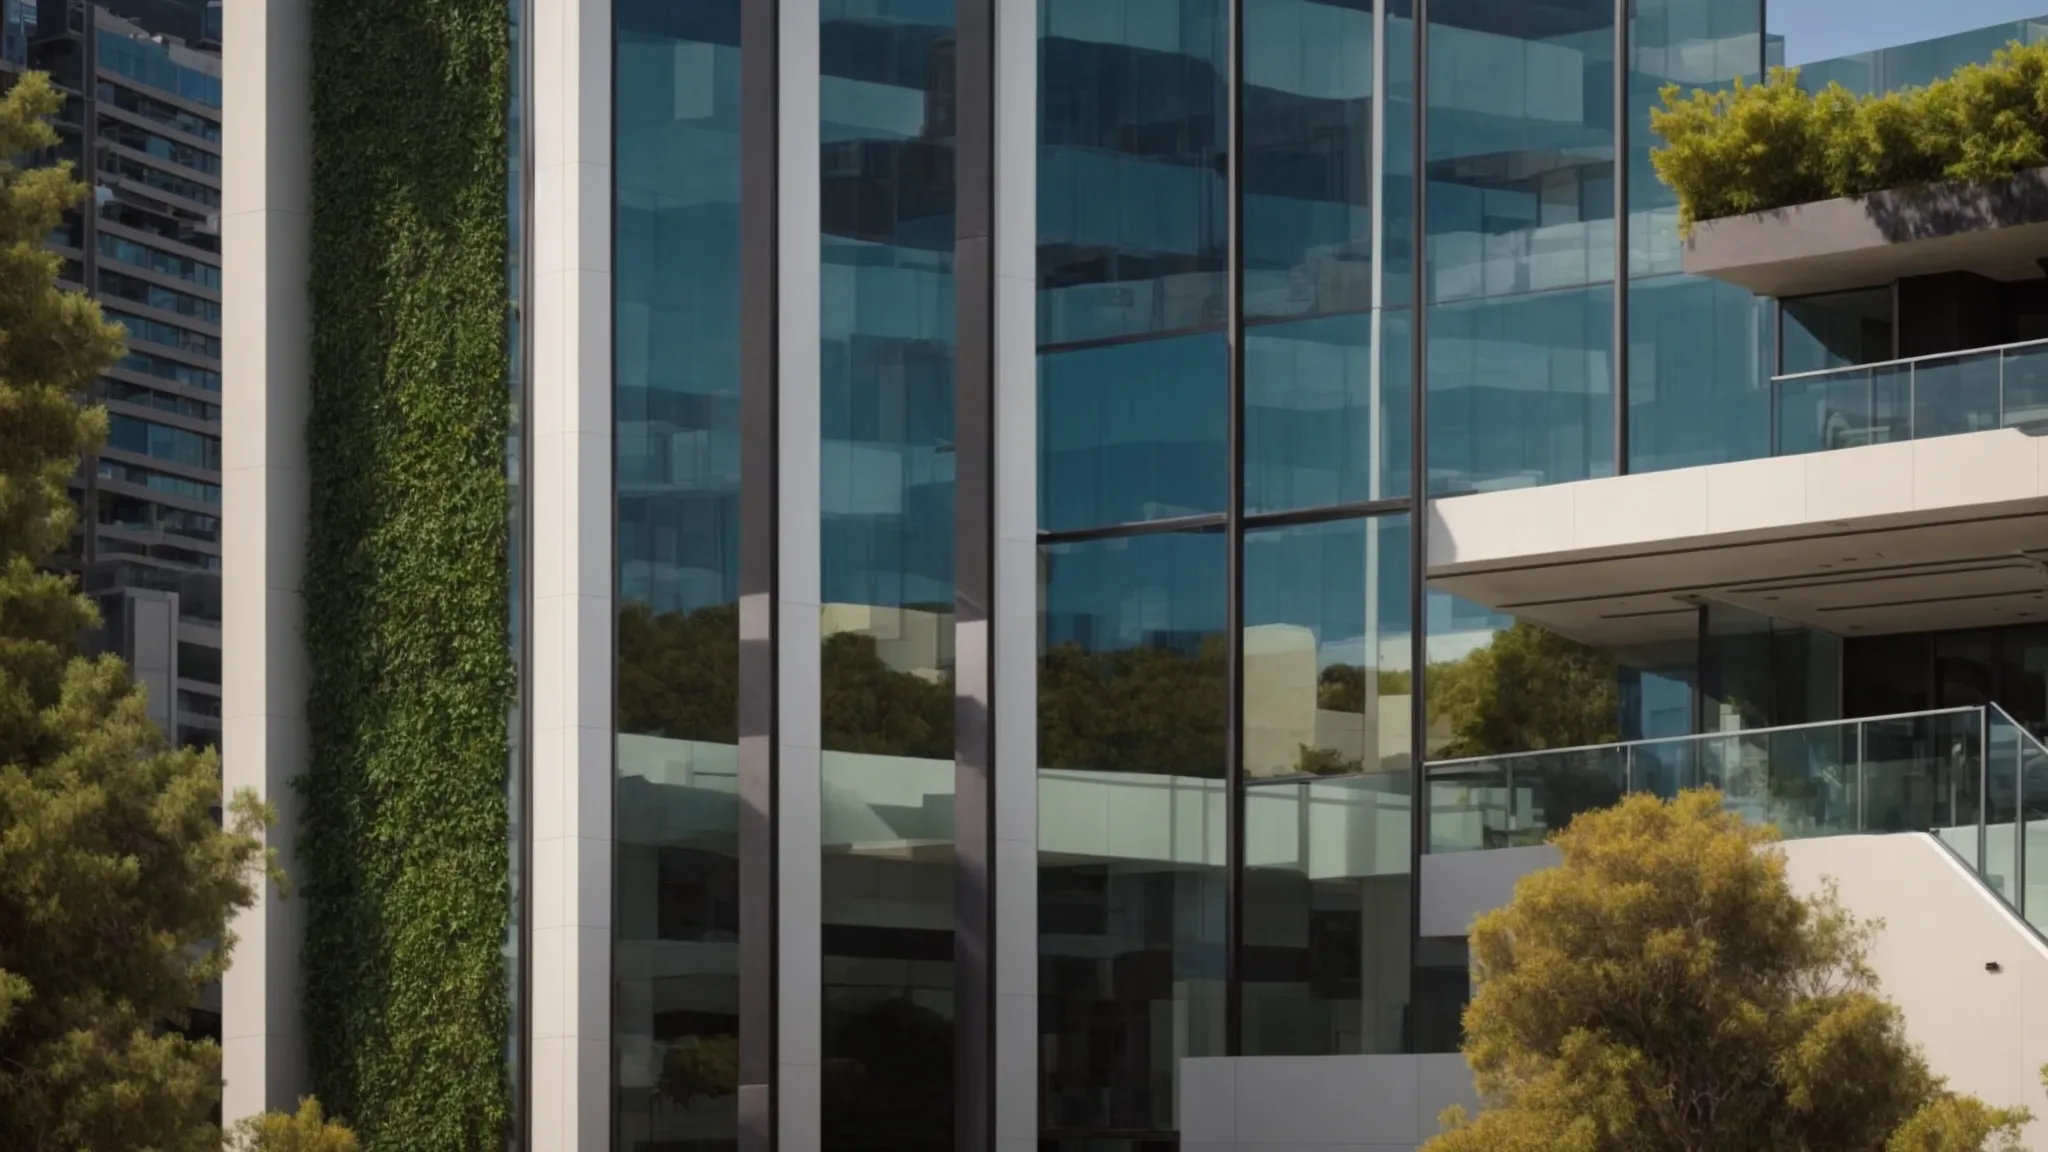 Show a sleek, glass-paneled office building in San Diego with solar panels on the roof, vertical gardens on the exterior walls, and large windows for natural light.